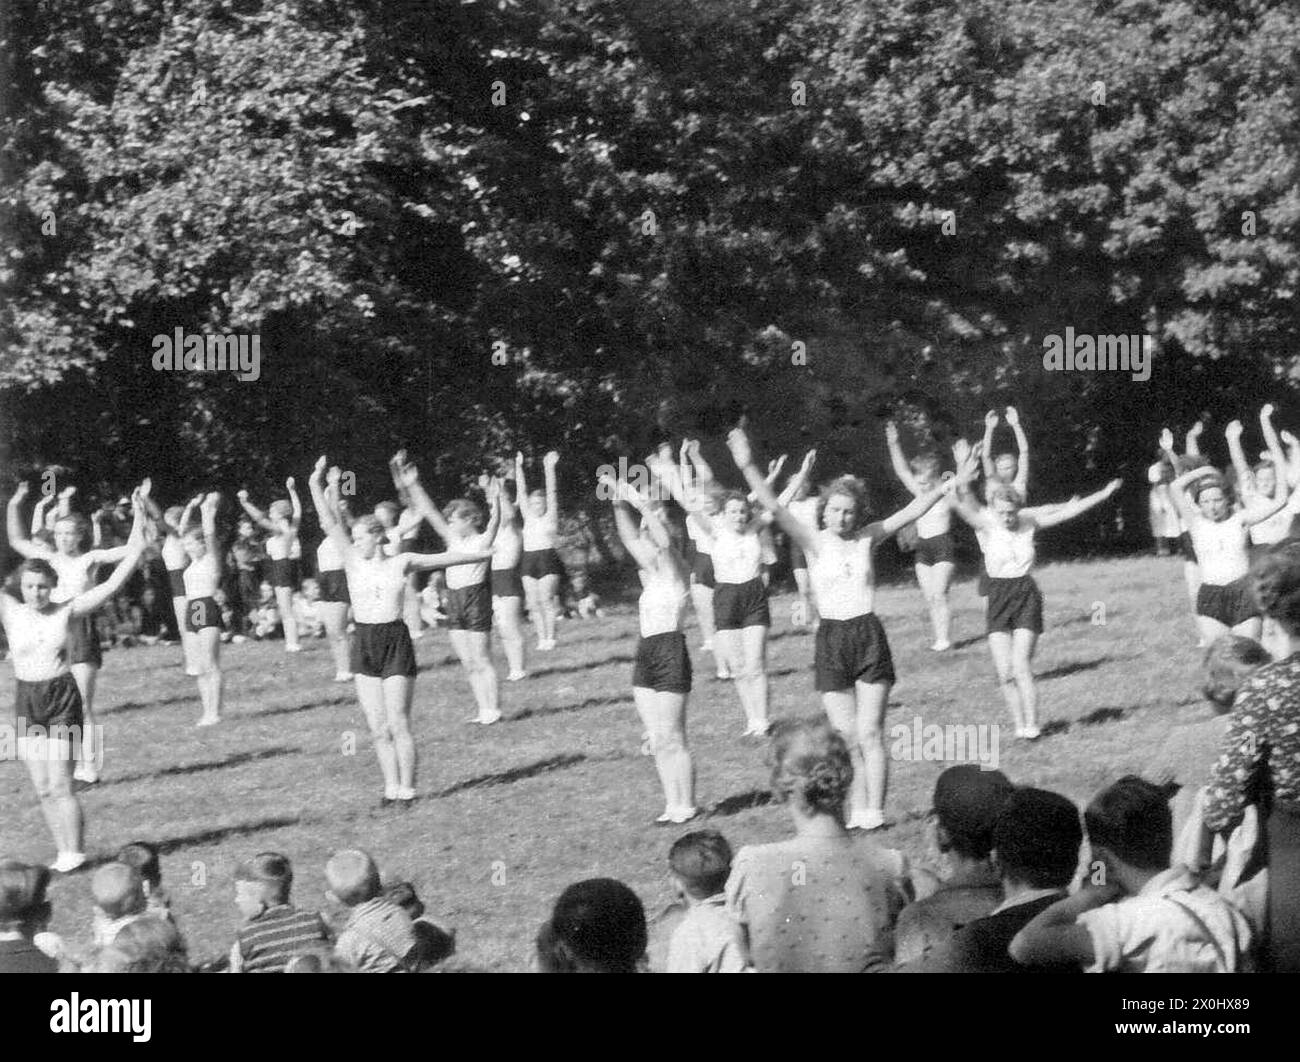 Ochsenfurt in the Third Reich - Girls at the sports festival [automated translation] Stock Photo